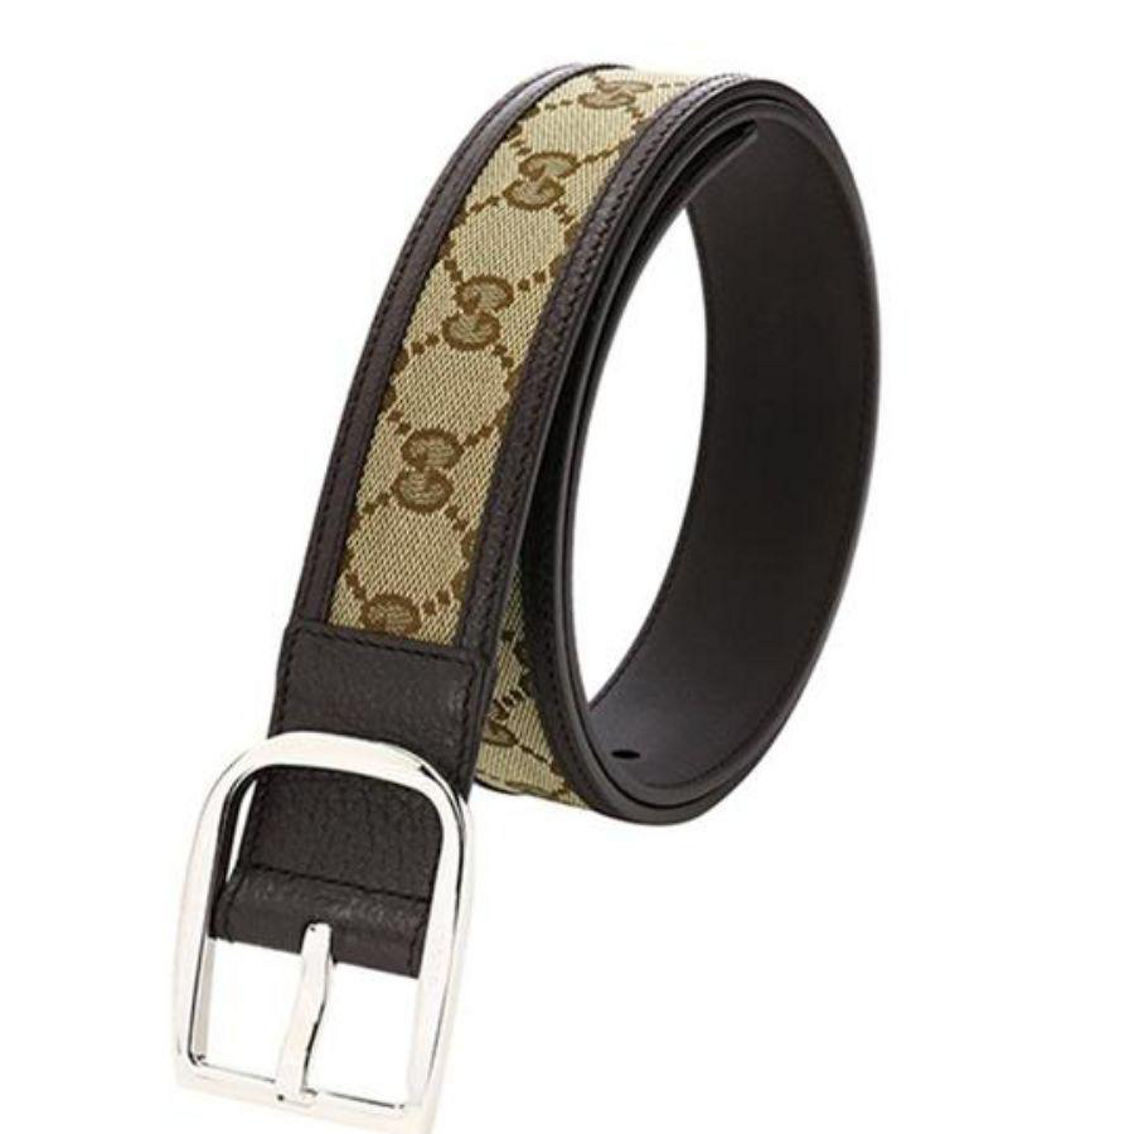 Gucci Mens GG Brown and Beige Size 36/90 Canvas Leather Trim Belt (New) - Image 3 of 5